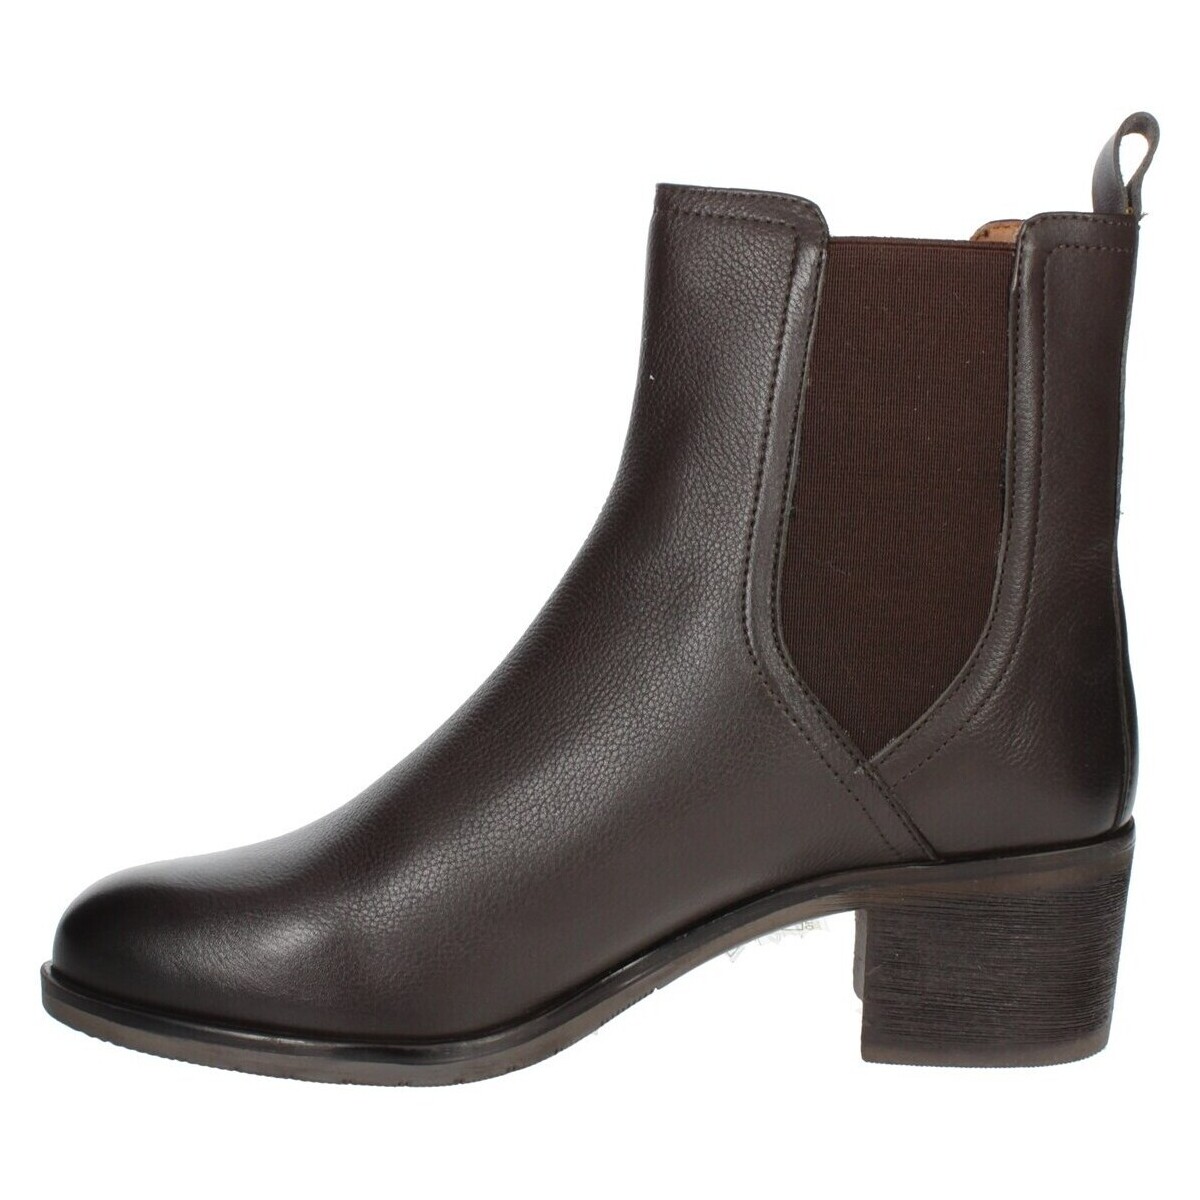 Chaussures Femme Boots Osey TR0109 Marron